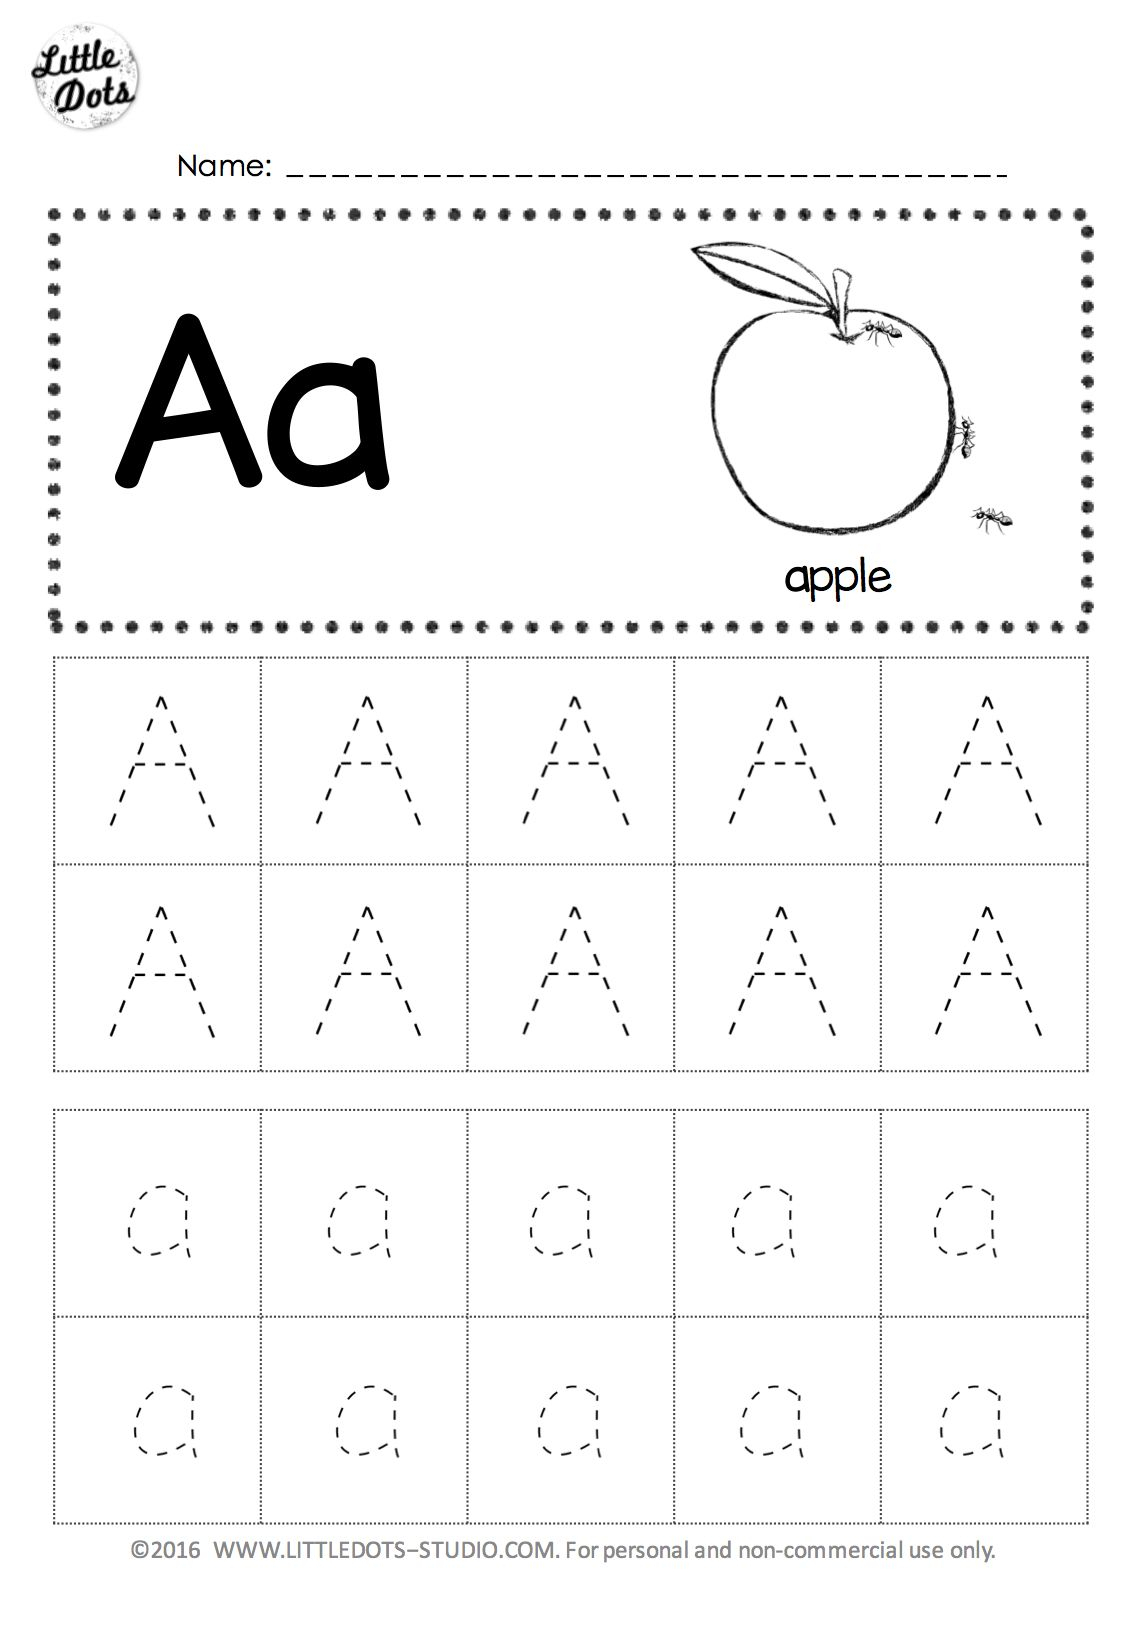 Free Letter A Tracing Worksheet intended for Dot To Dot Letters For Tracing